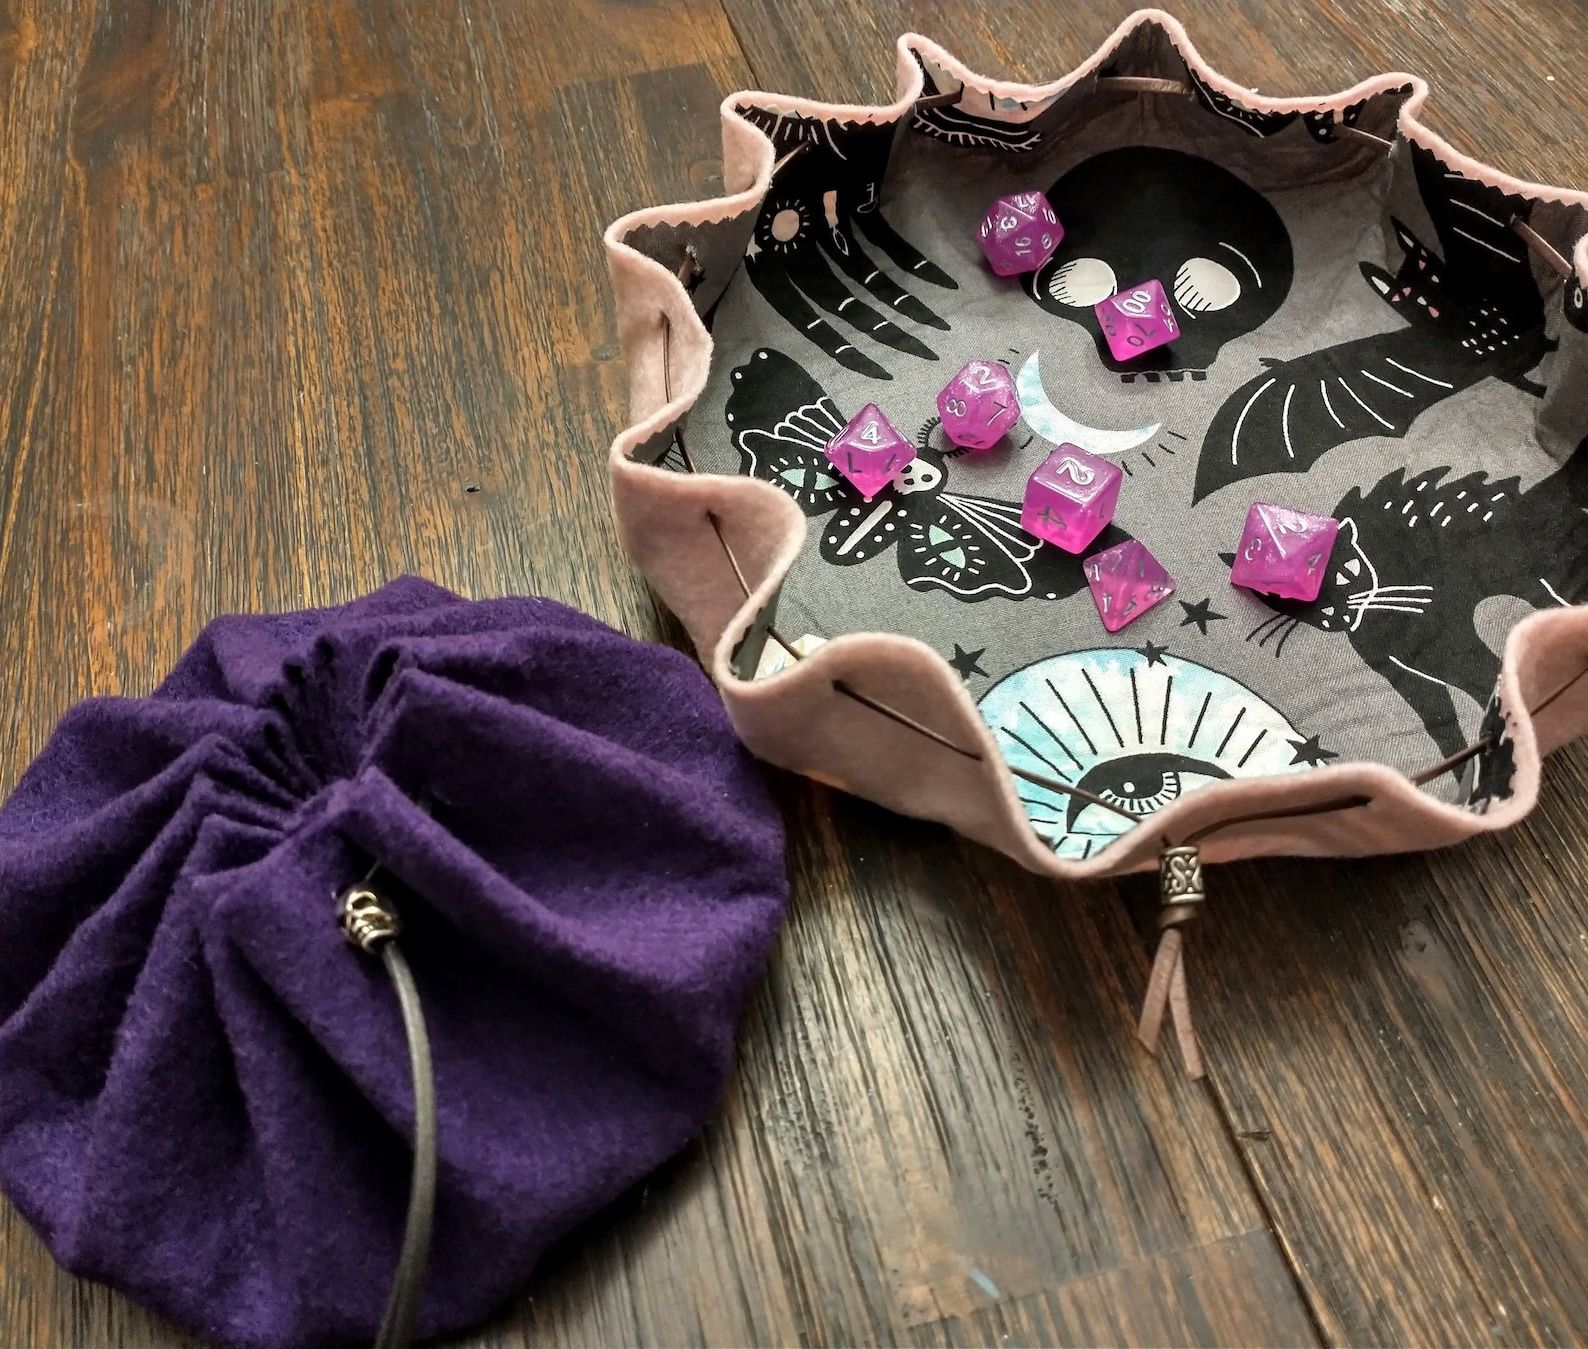 one open felt bag with dice and another closed felt bag are on a table. 